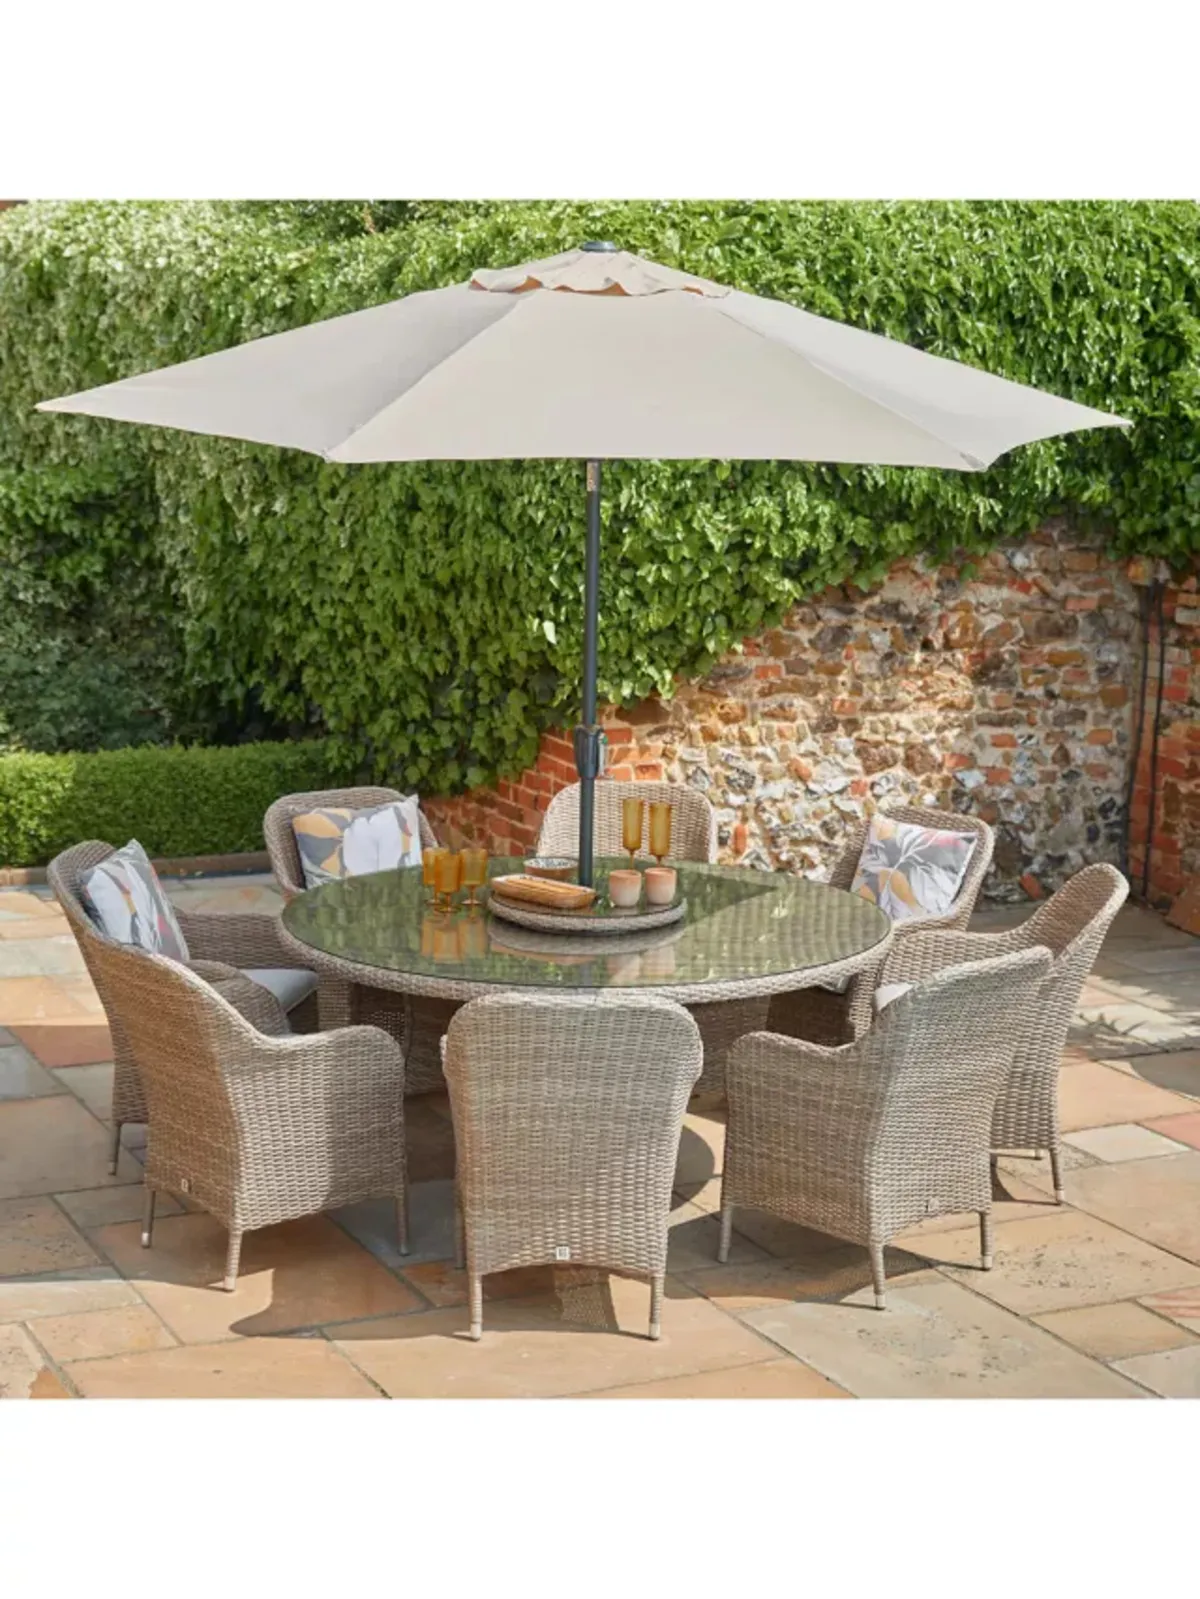 Large round garden table and eight chairs with parasol